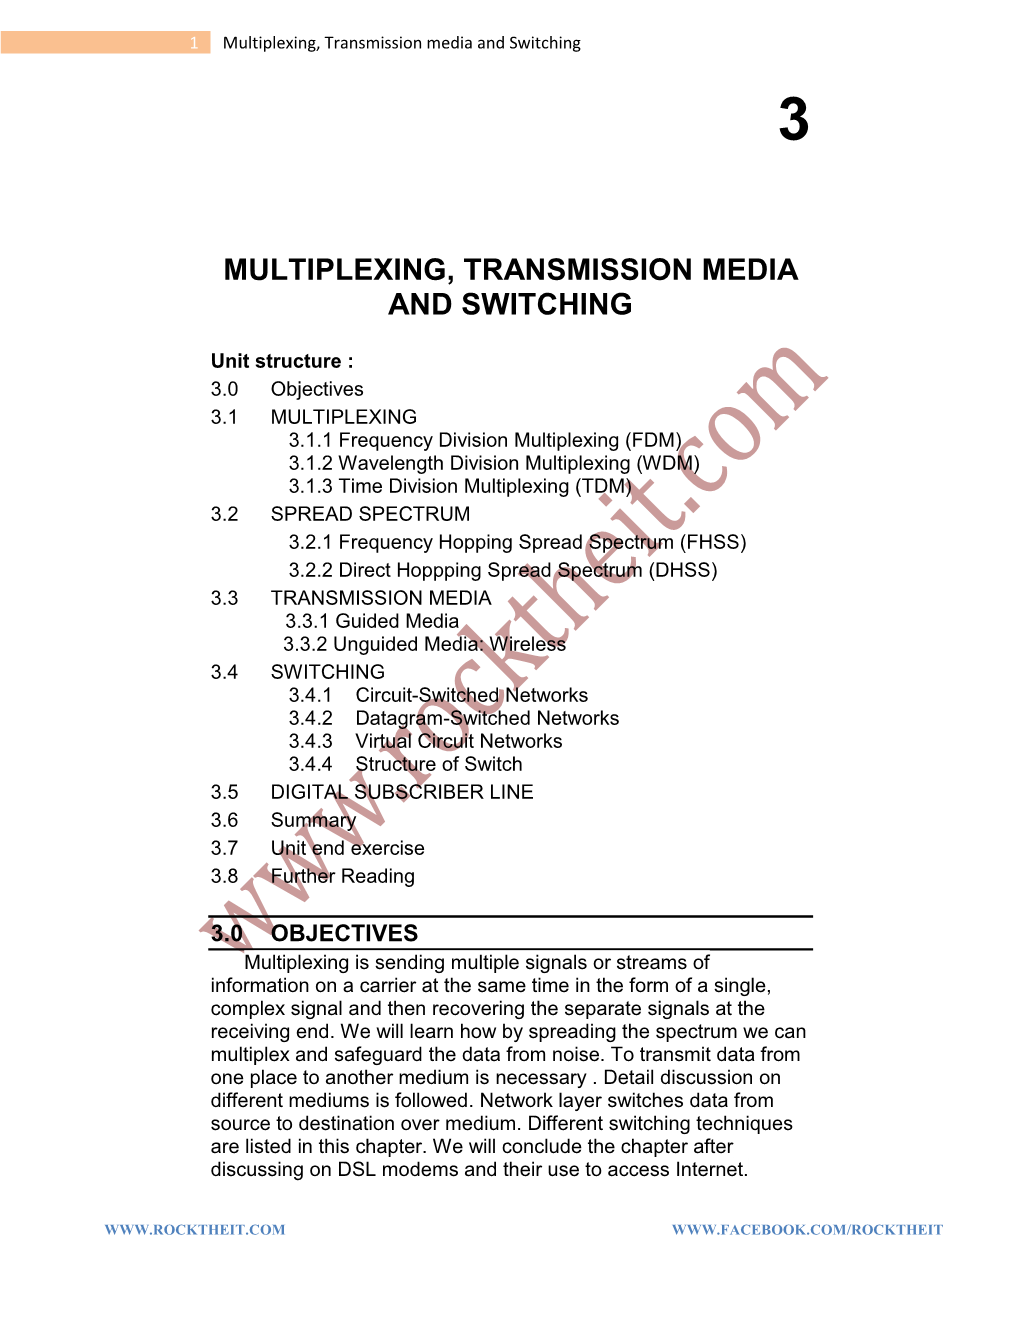 Multiplexing, Transmission Media and Switching